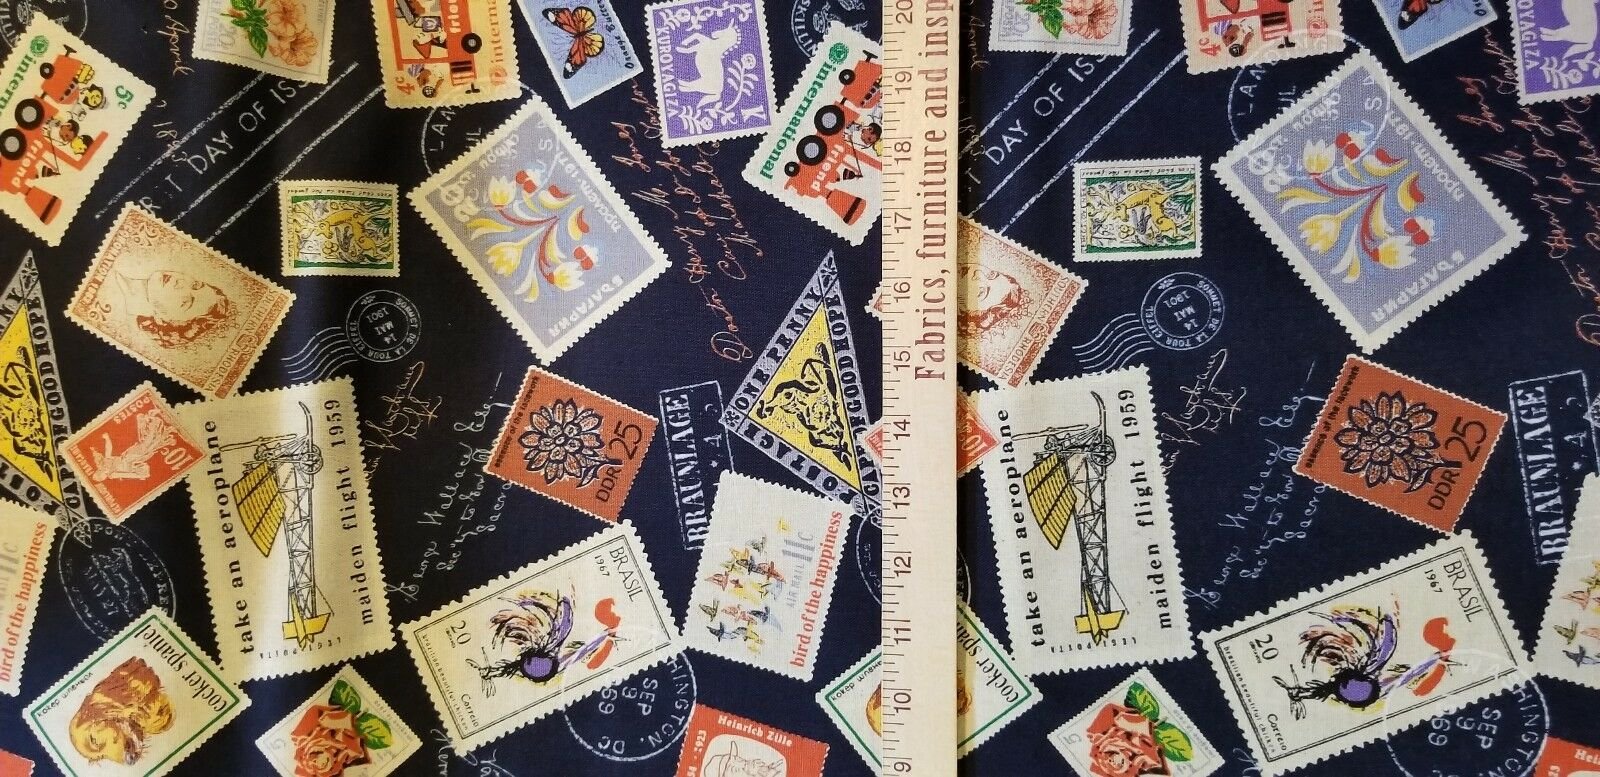 Navy Duck Cloth from Japan with Foreign International Stamps - Weekender  Totes! - Beautiful Textiles